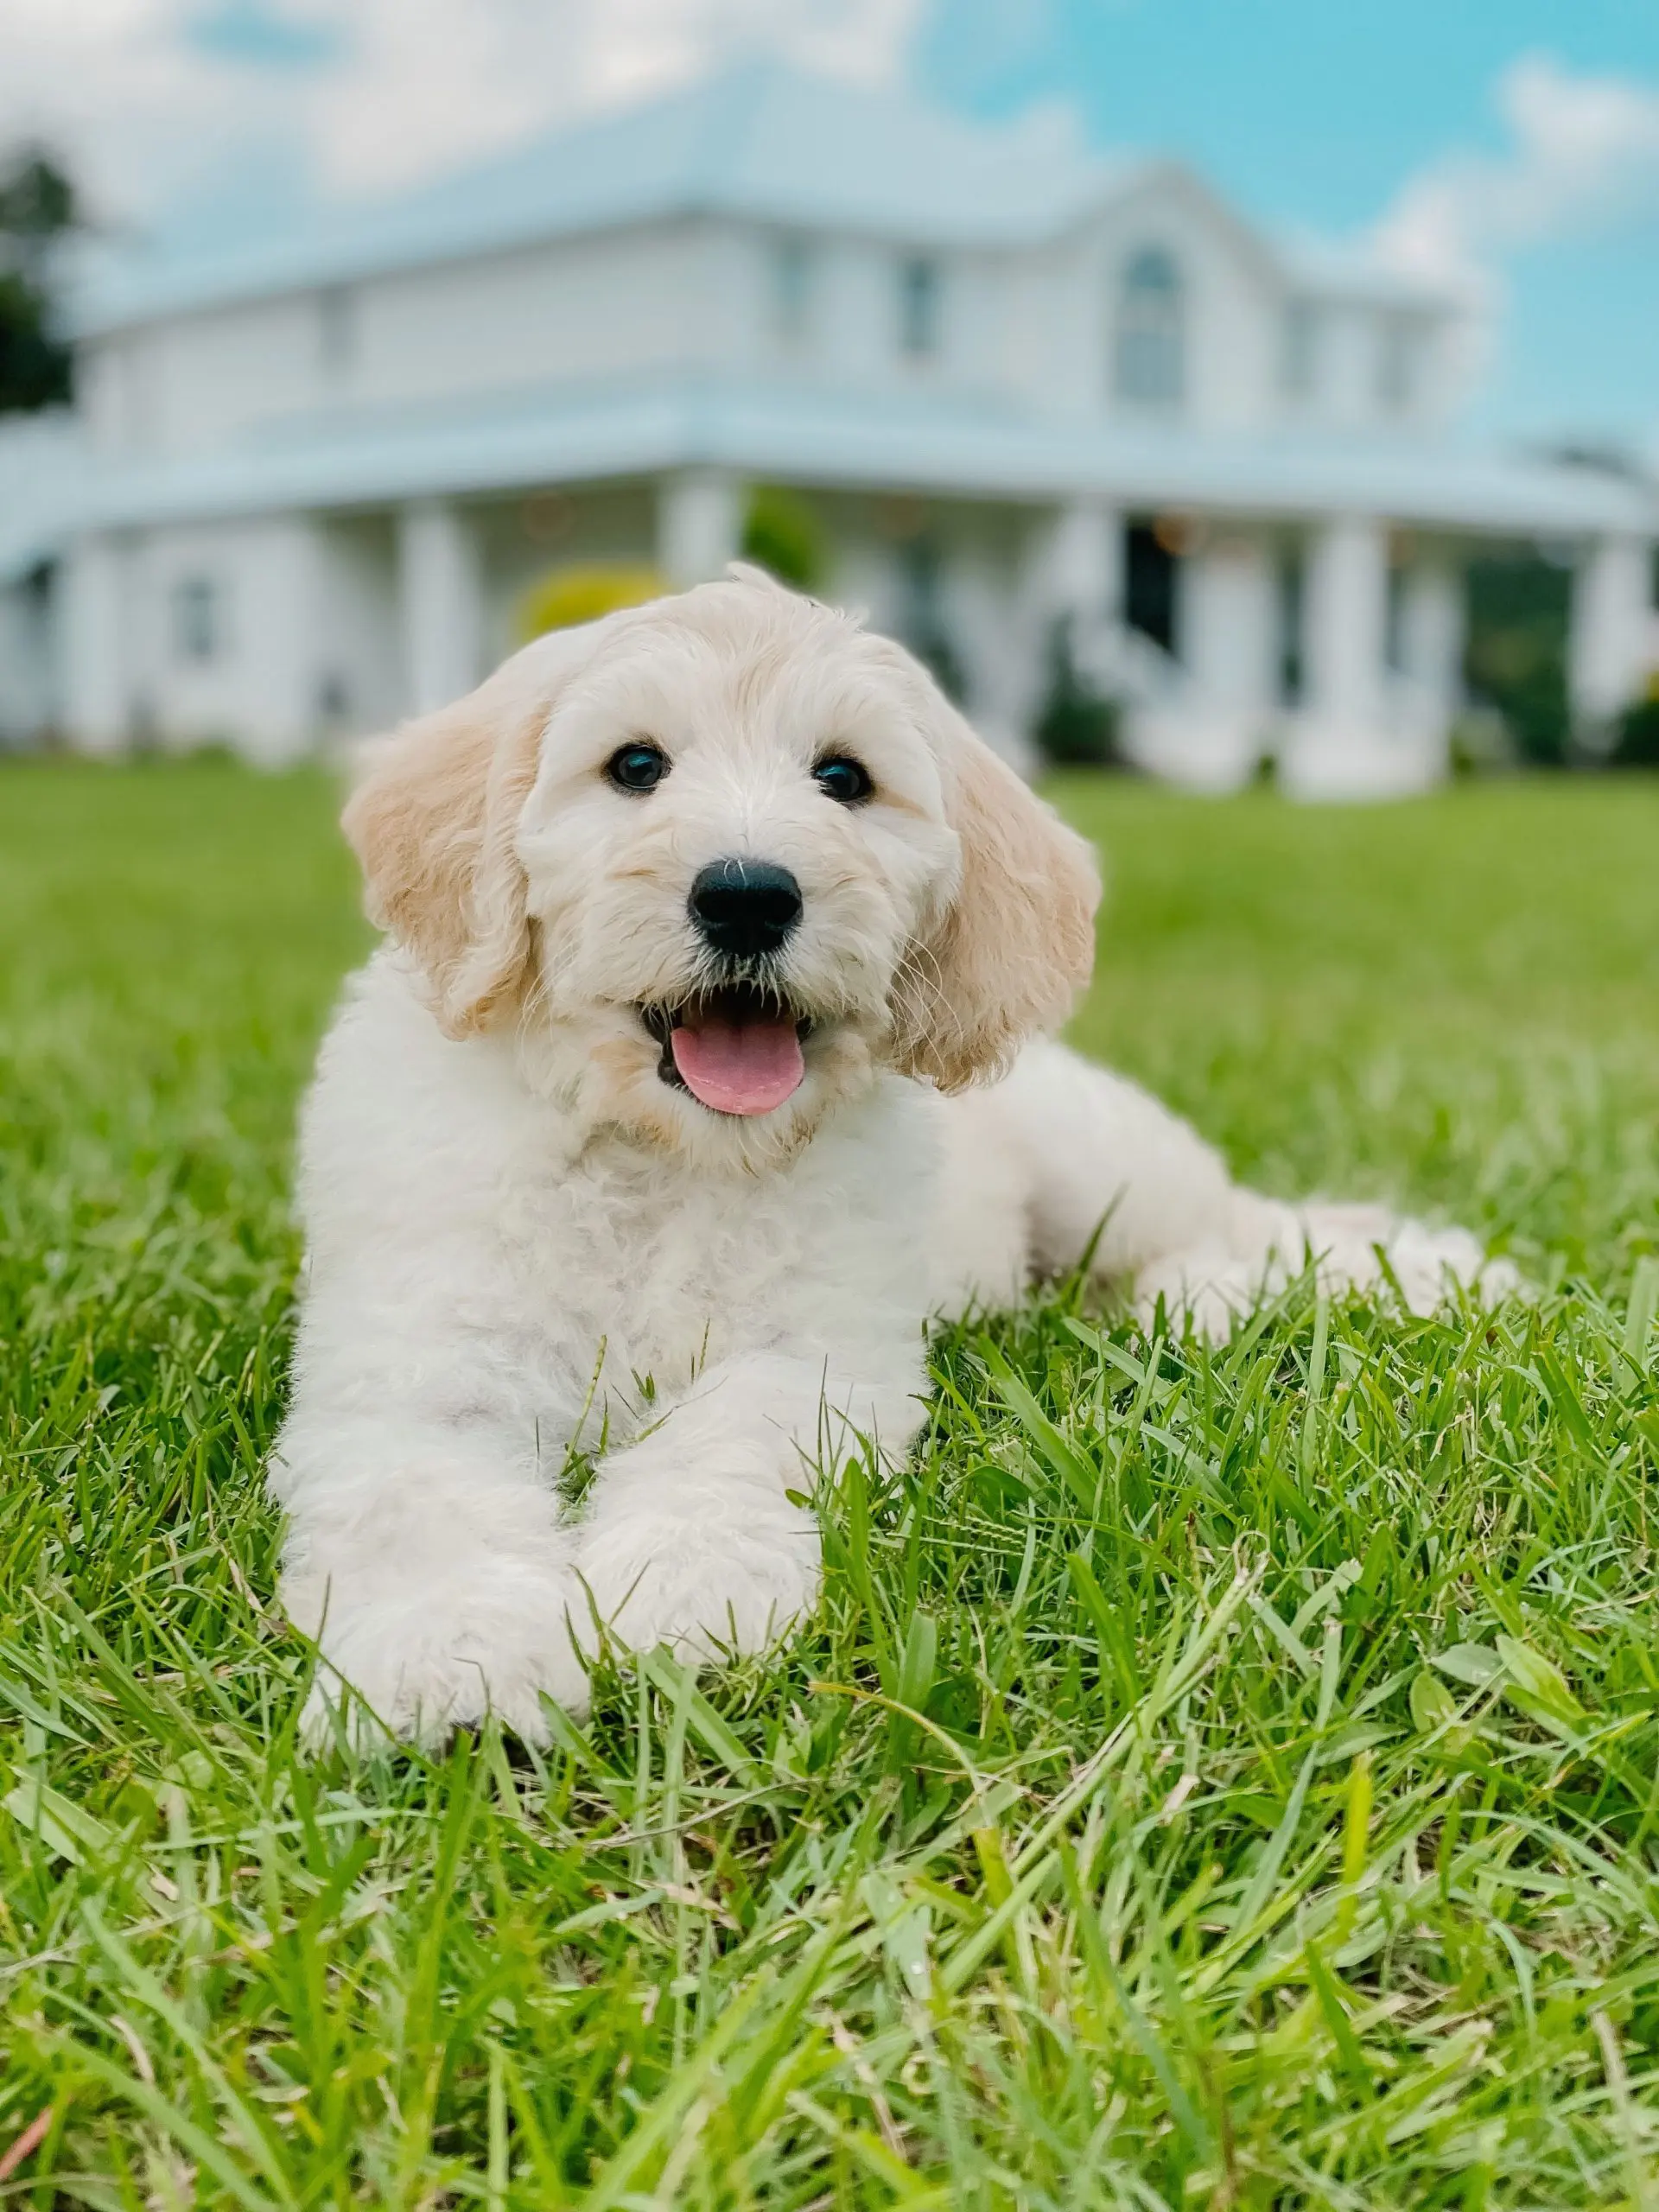 f1 English teddybear goldendoodle puppy laying in grass